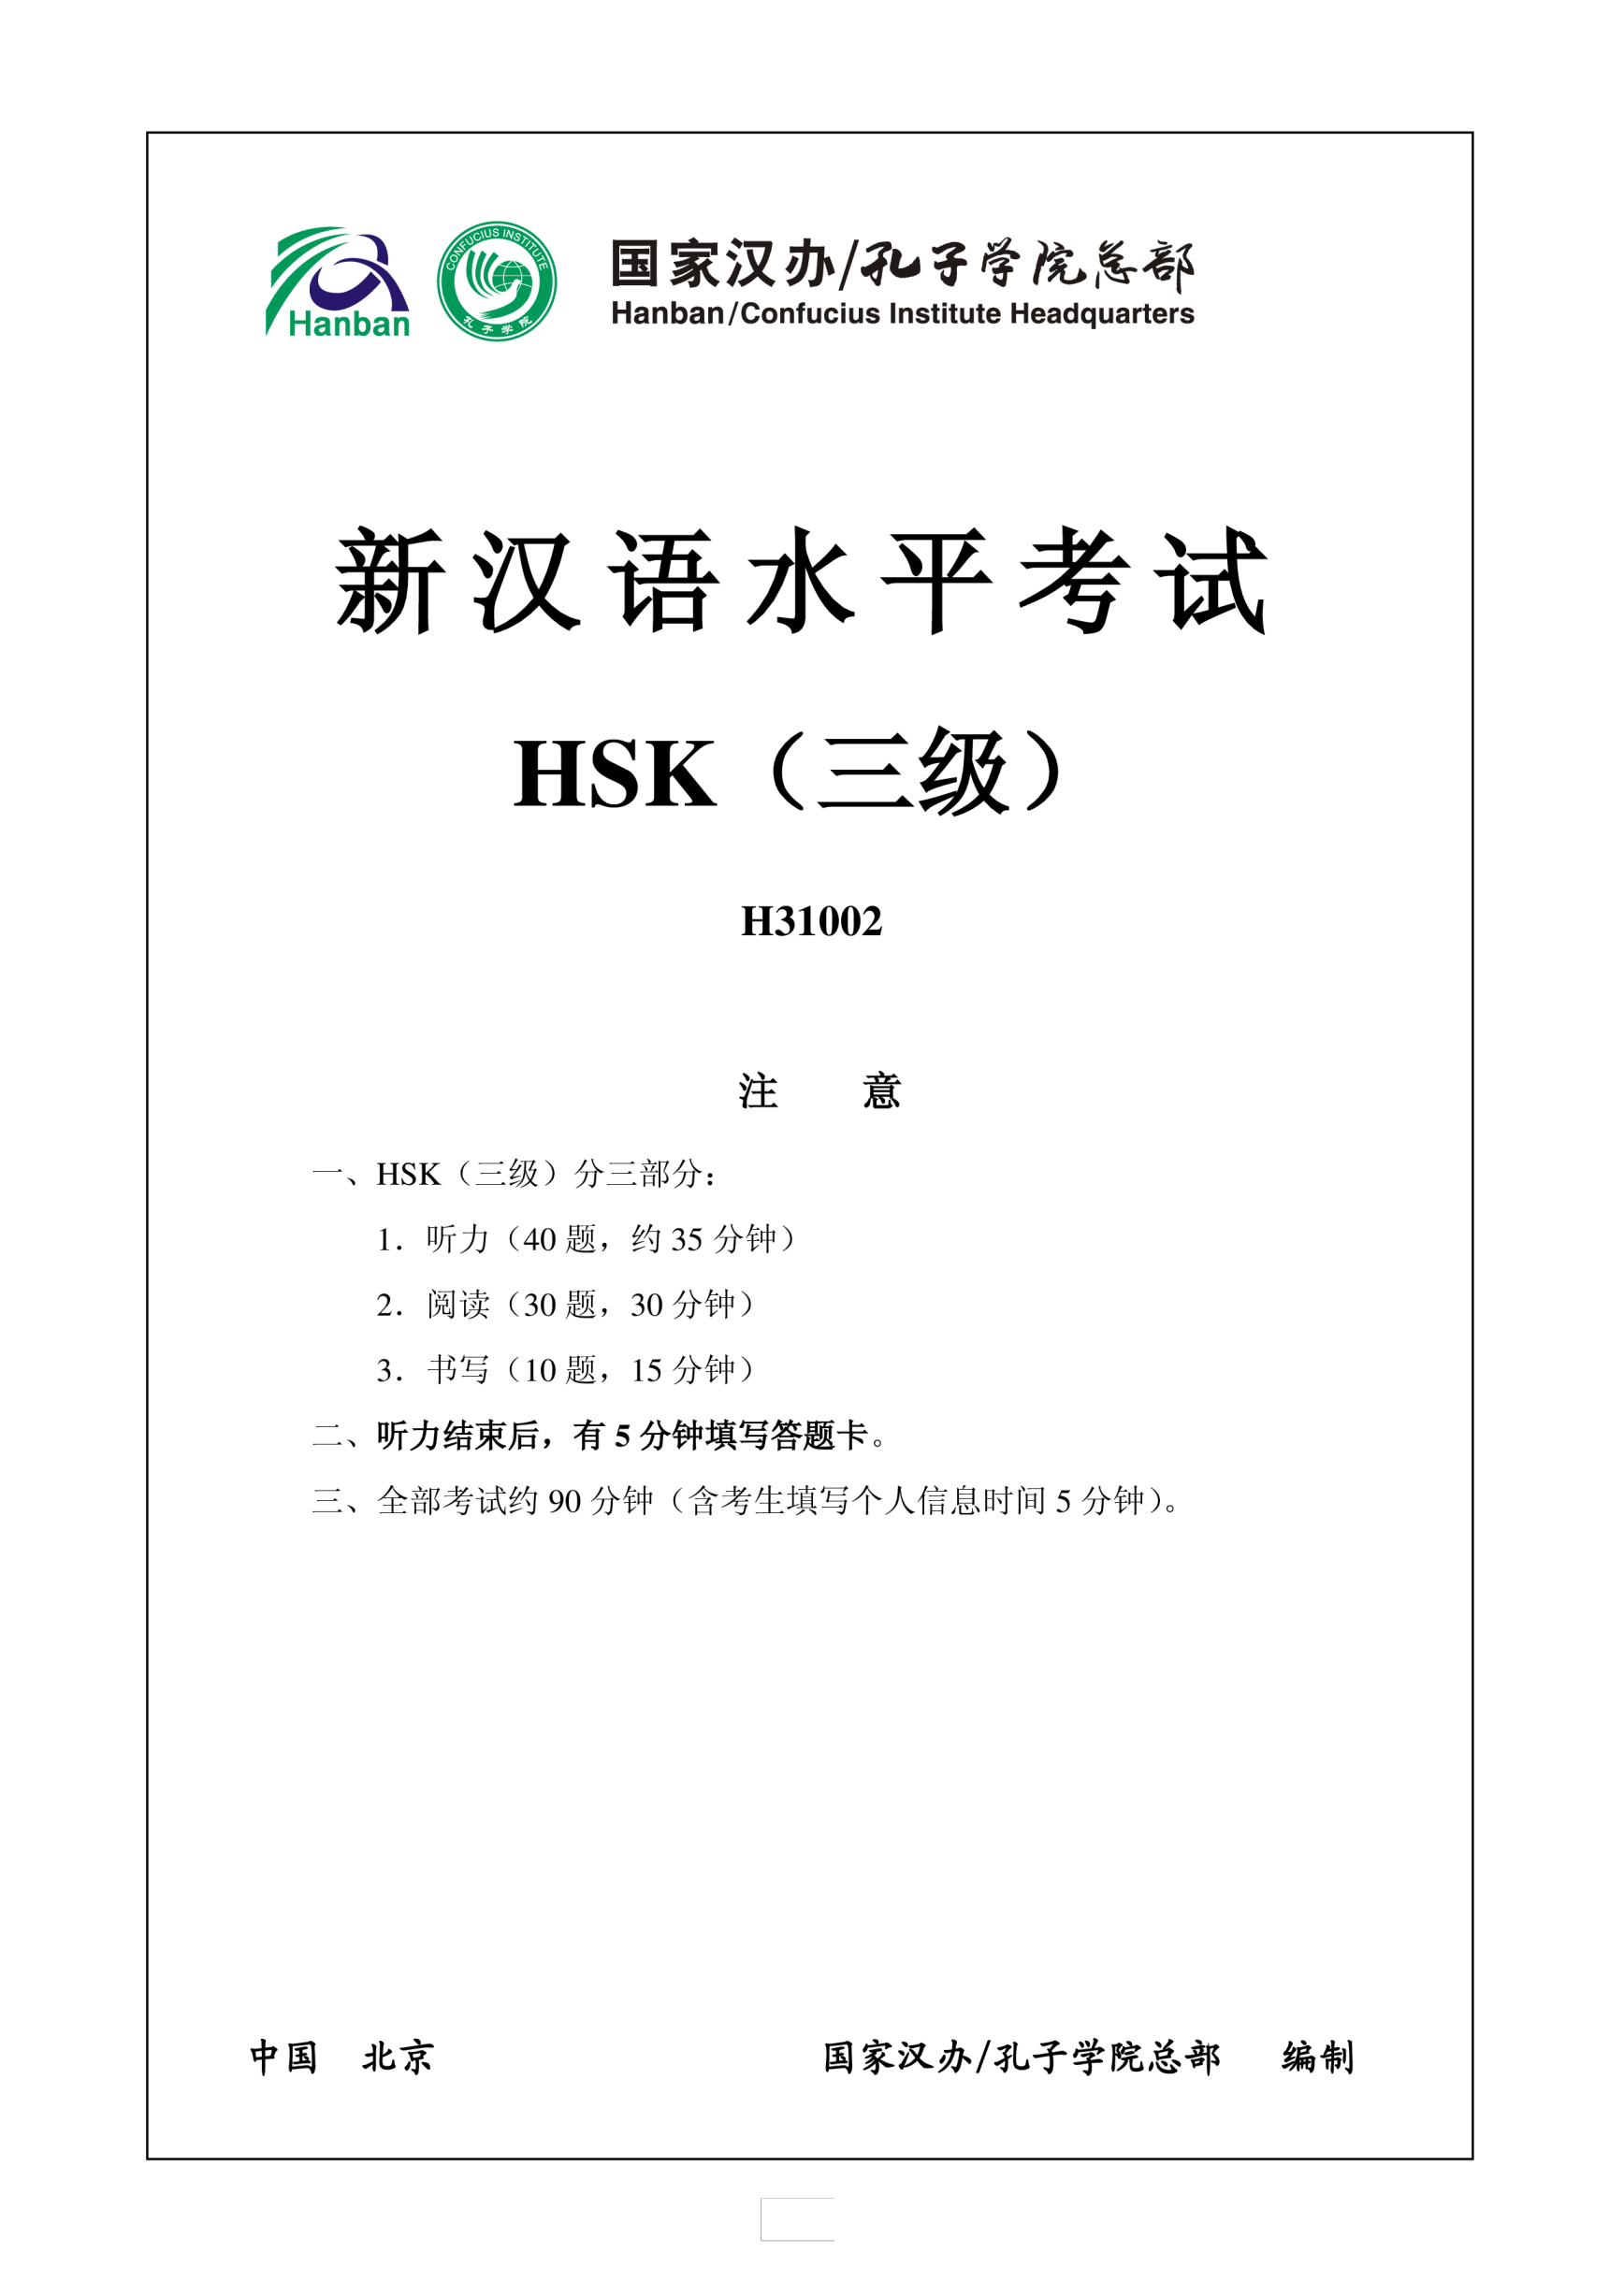 template preview imageHSK3 Chinese Exam including Answers HSK3 H31002